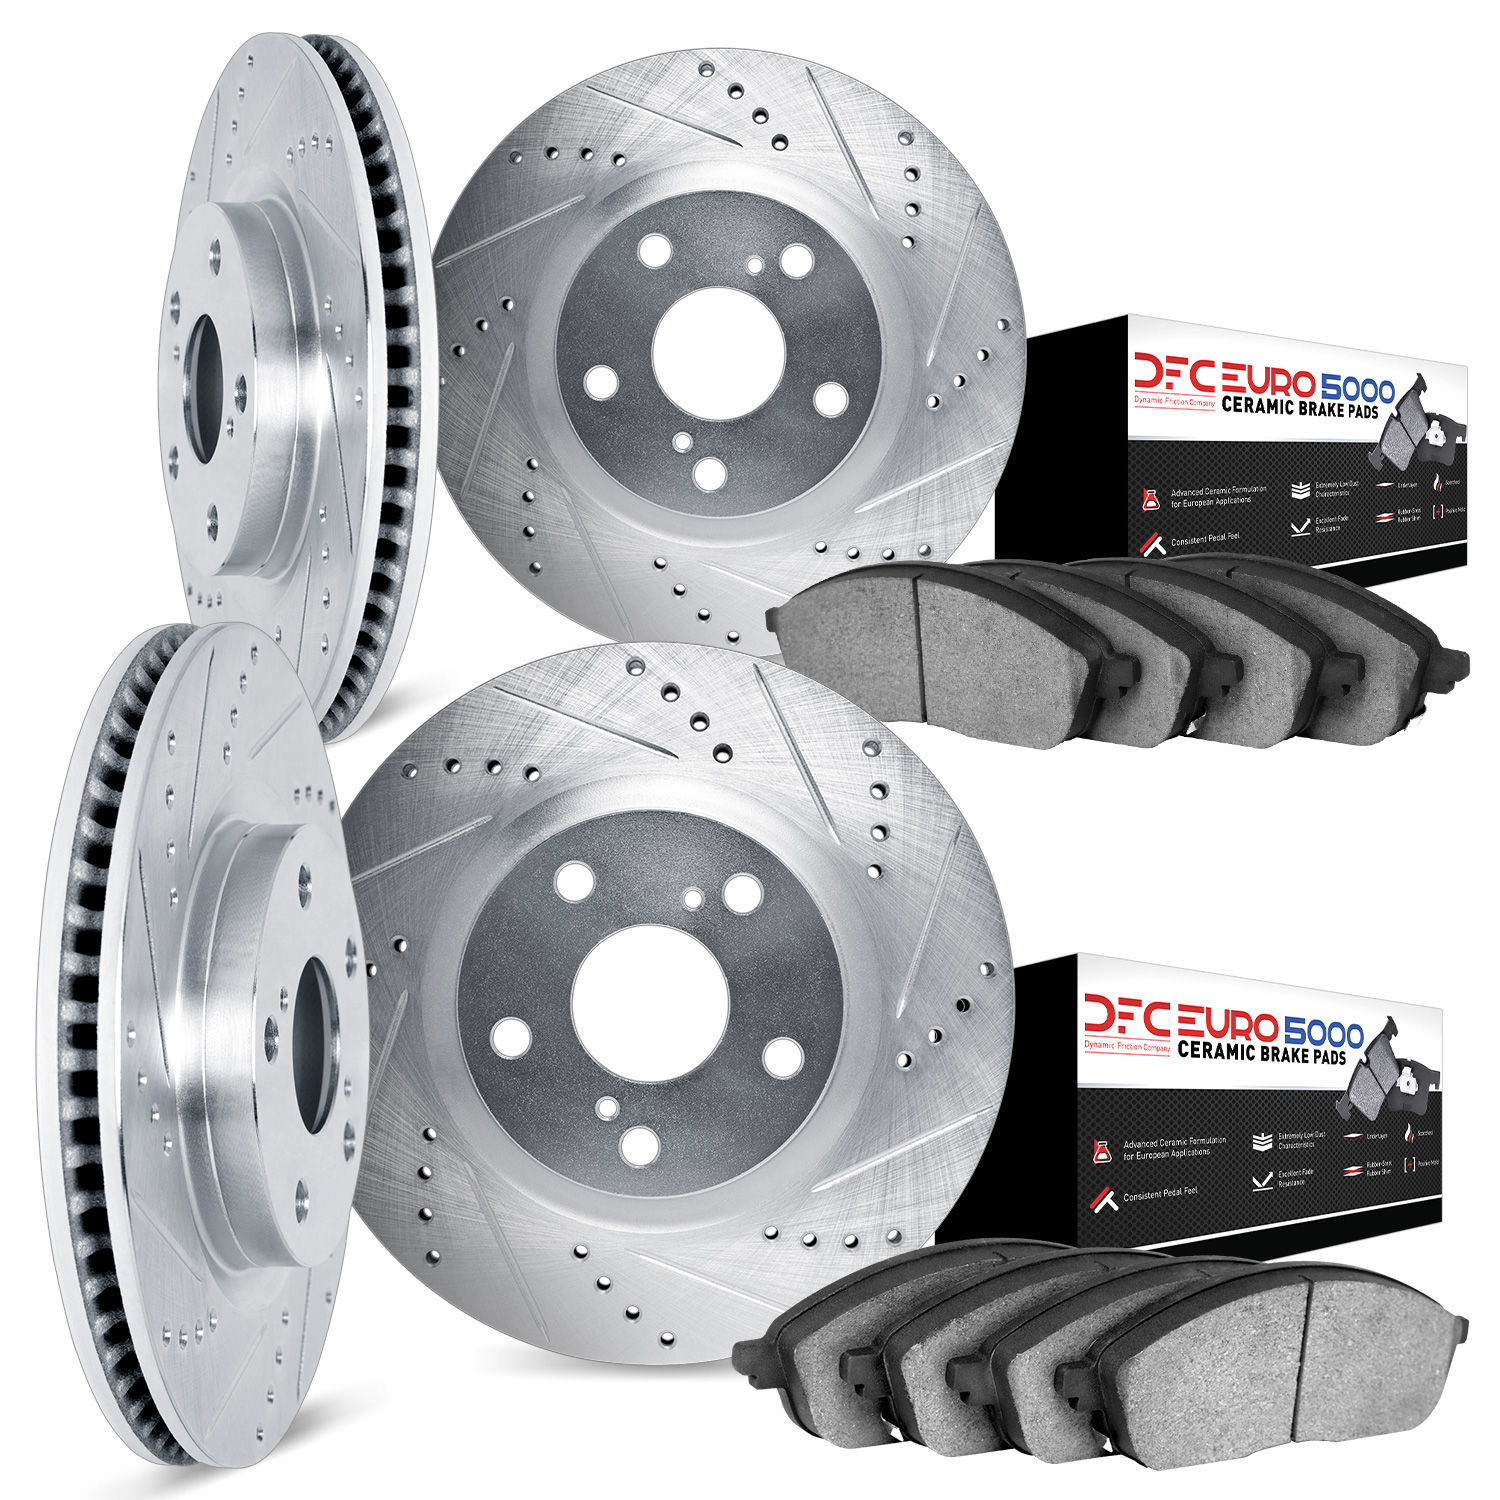 7604-27017 Drilled/Slotted Brake Rotors w/5000 Euro Ceramic Brake Pads Kit [Silver], 2007-2015 Volvo, Position: Front and Rear